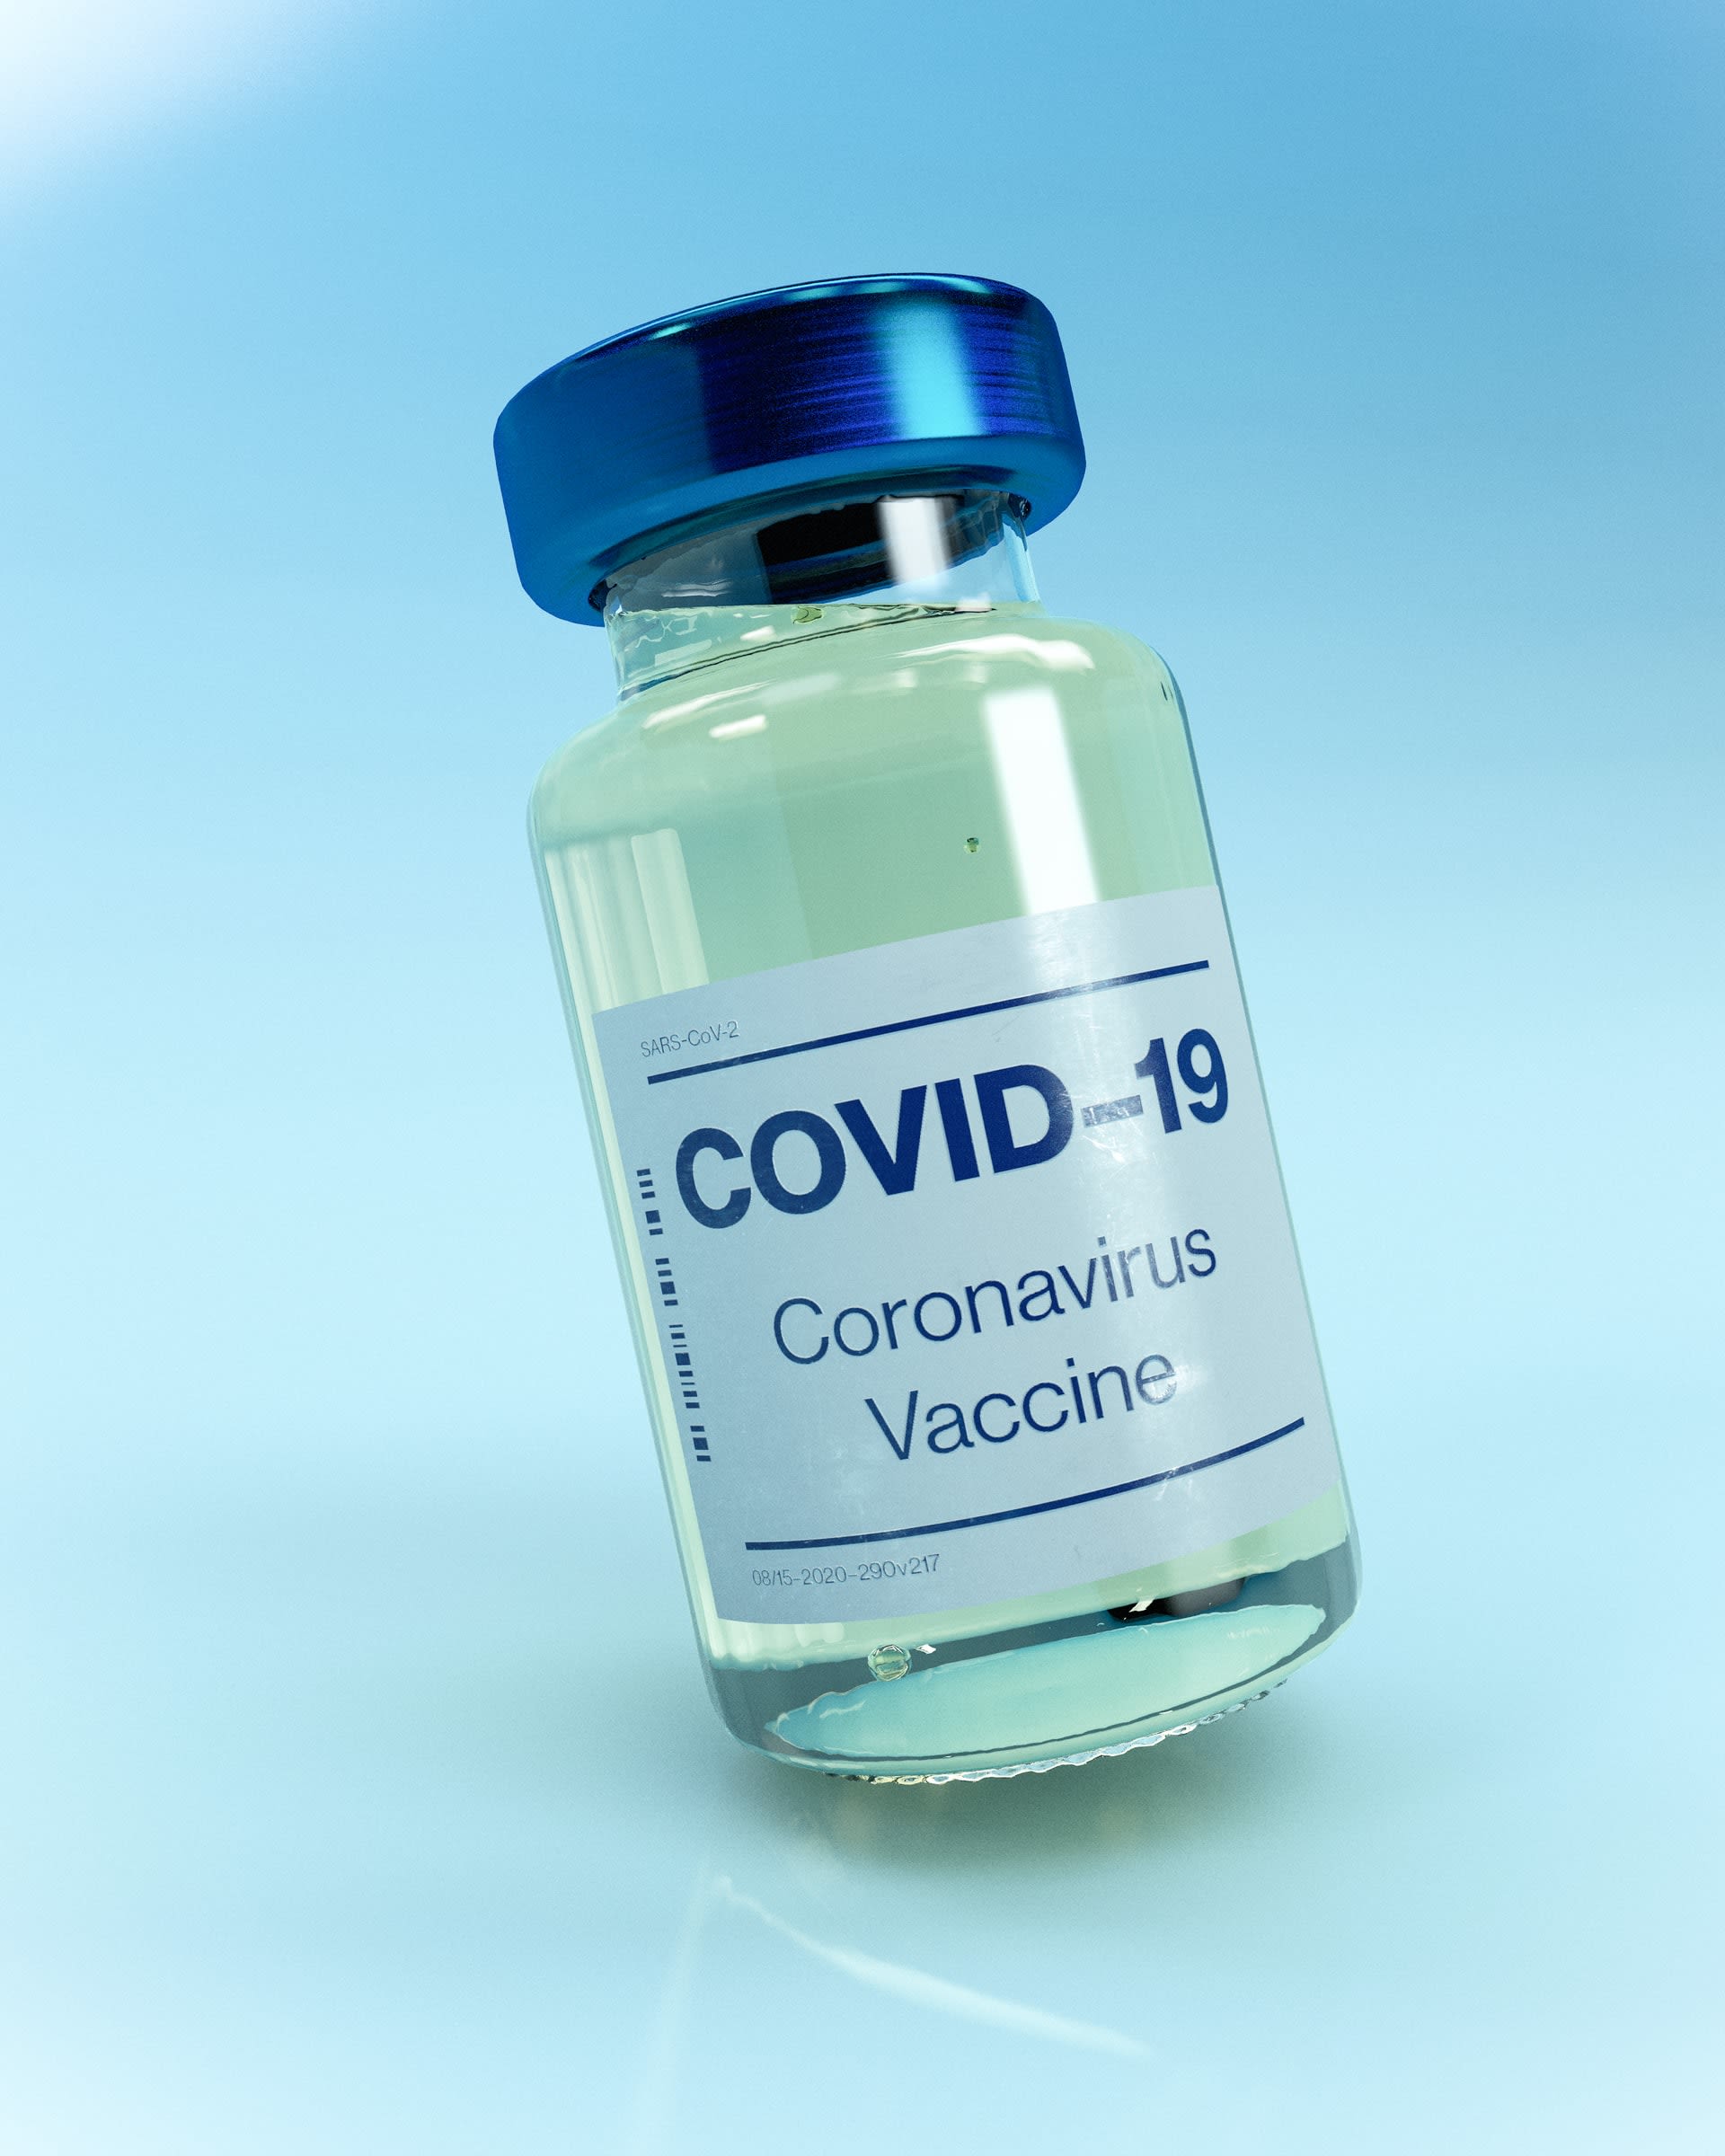 Covid-19 Vaccine Bottle Mockup with a blue lid